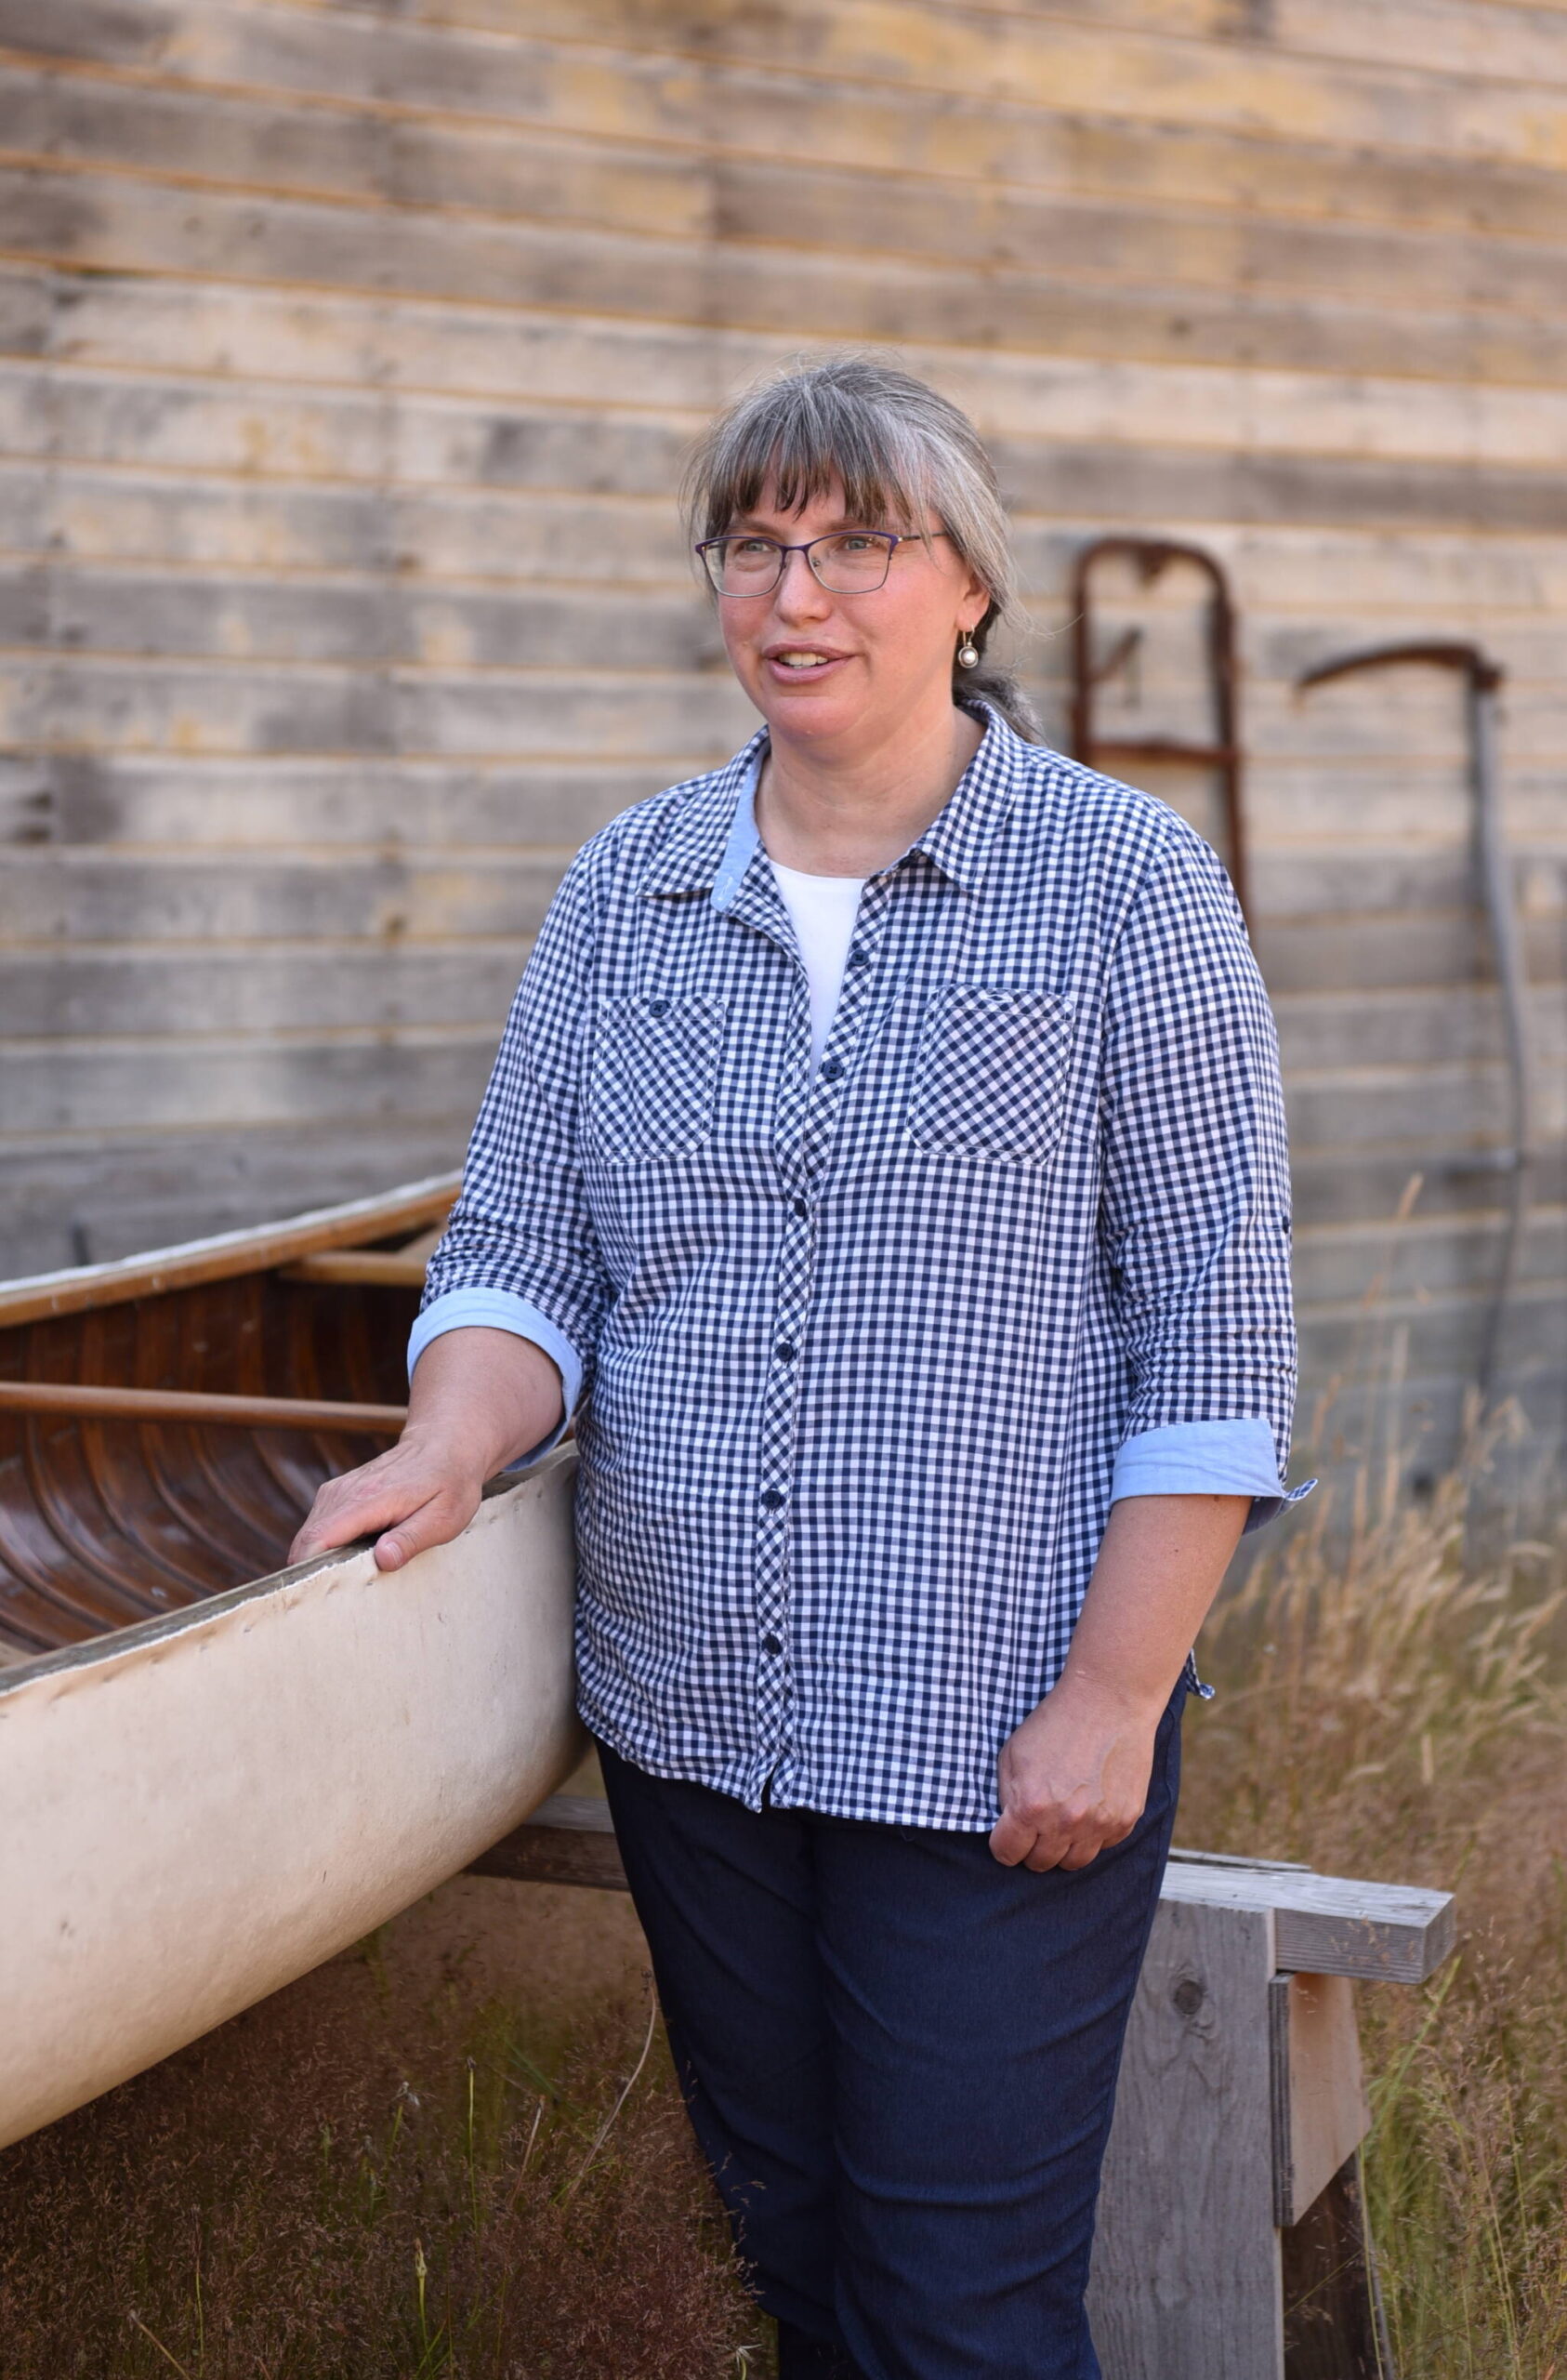 Carrie Nelson, a board member for the Conrad Mansion Museum in Kalispell, MT, gets her first look at the canvas canoe used by Alicia Conrad on her honeymoon in 1906.